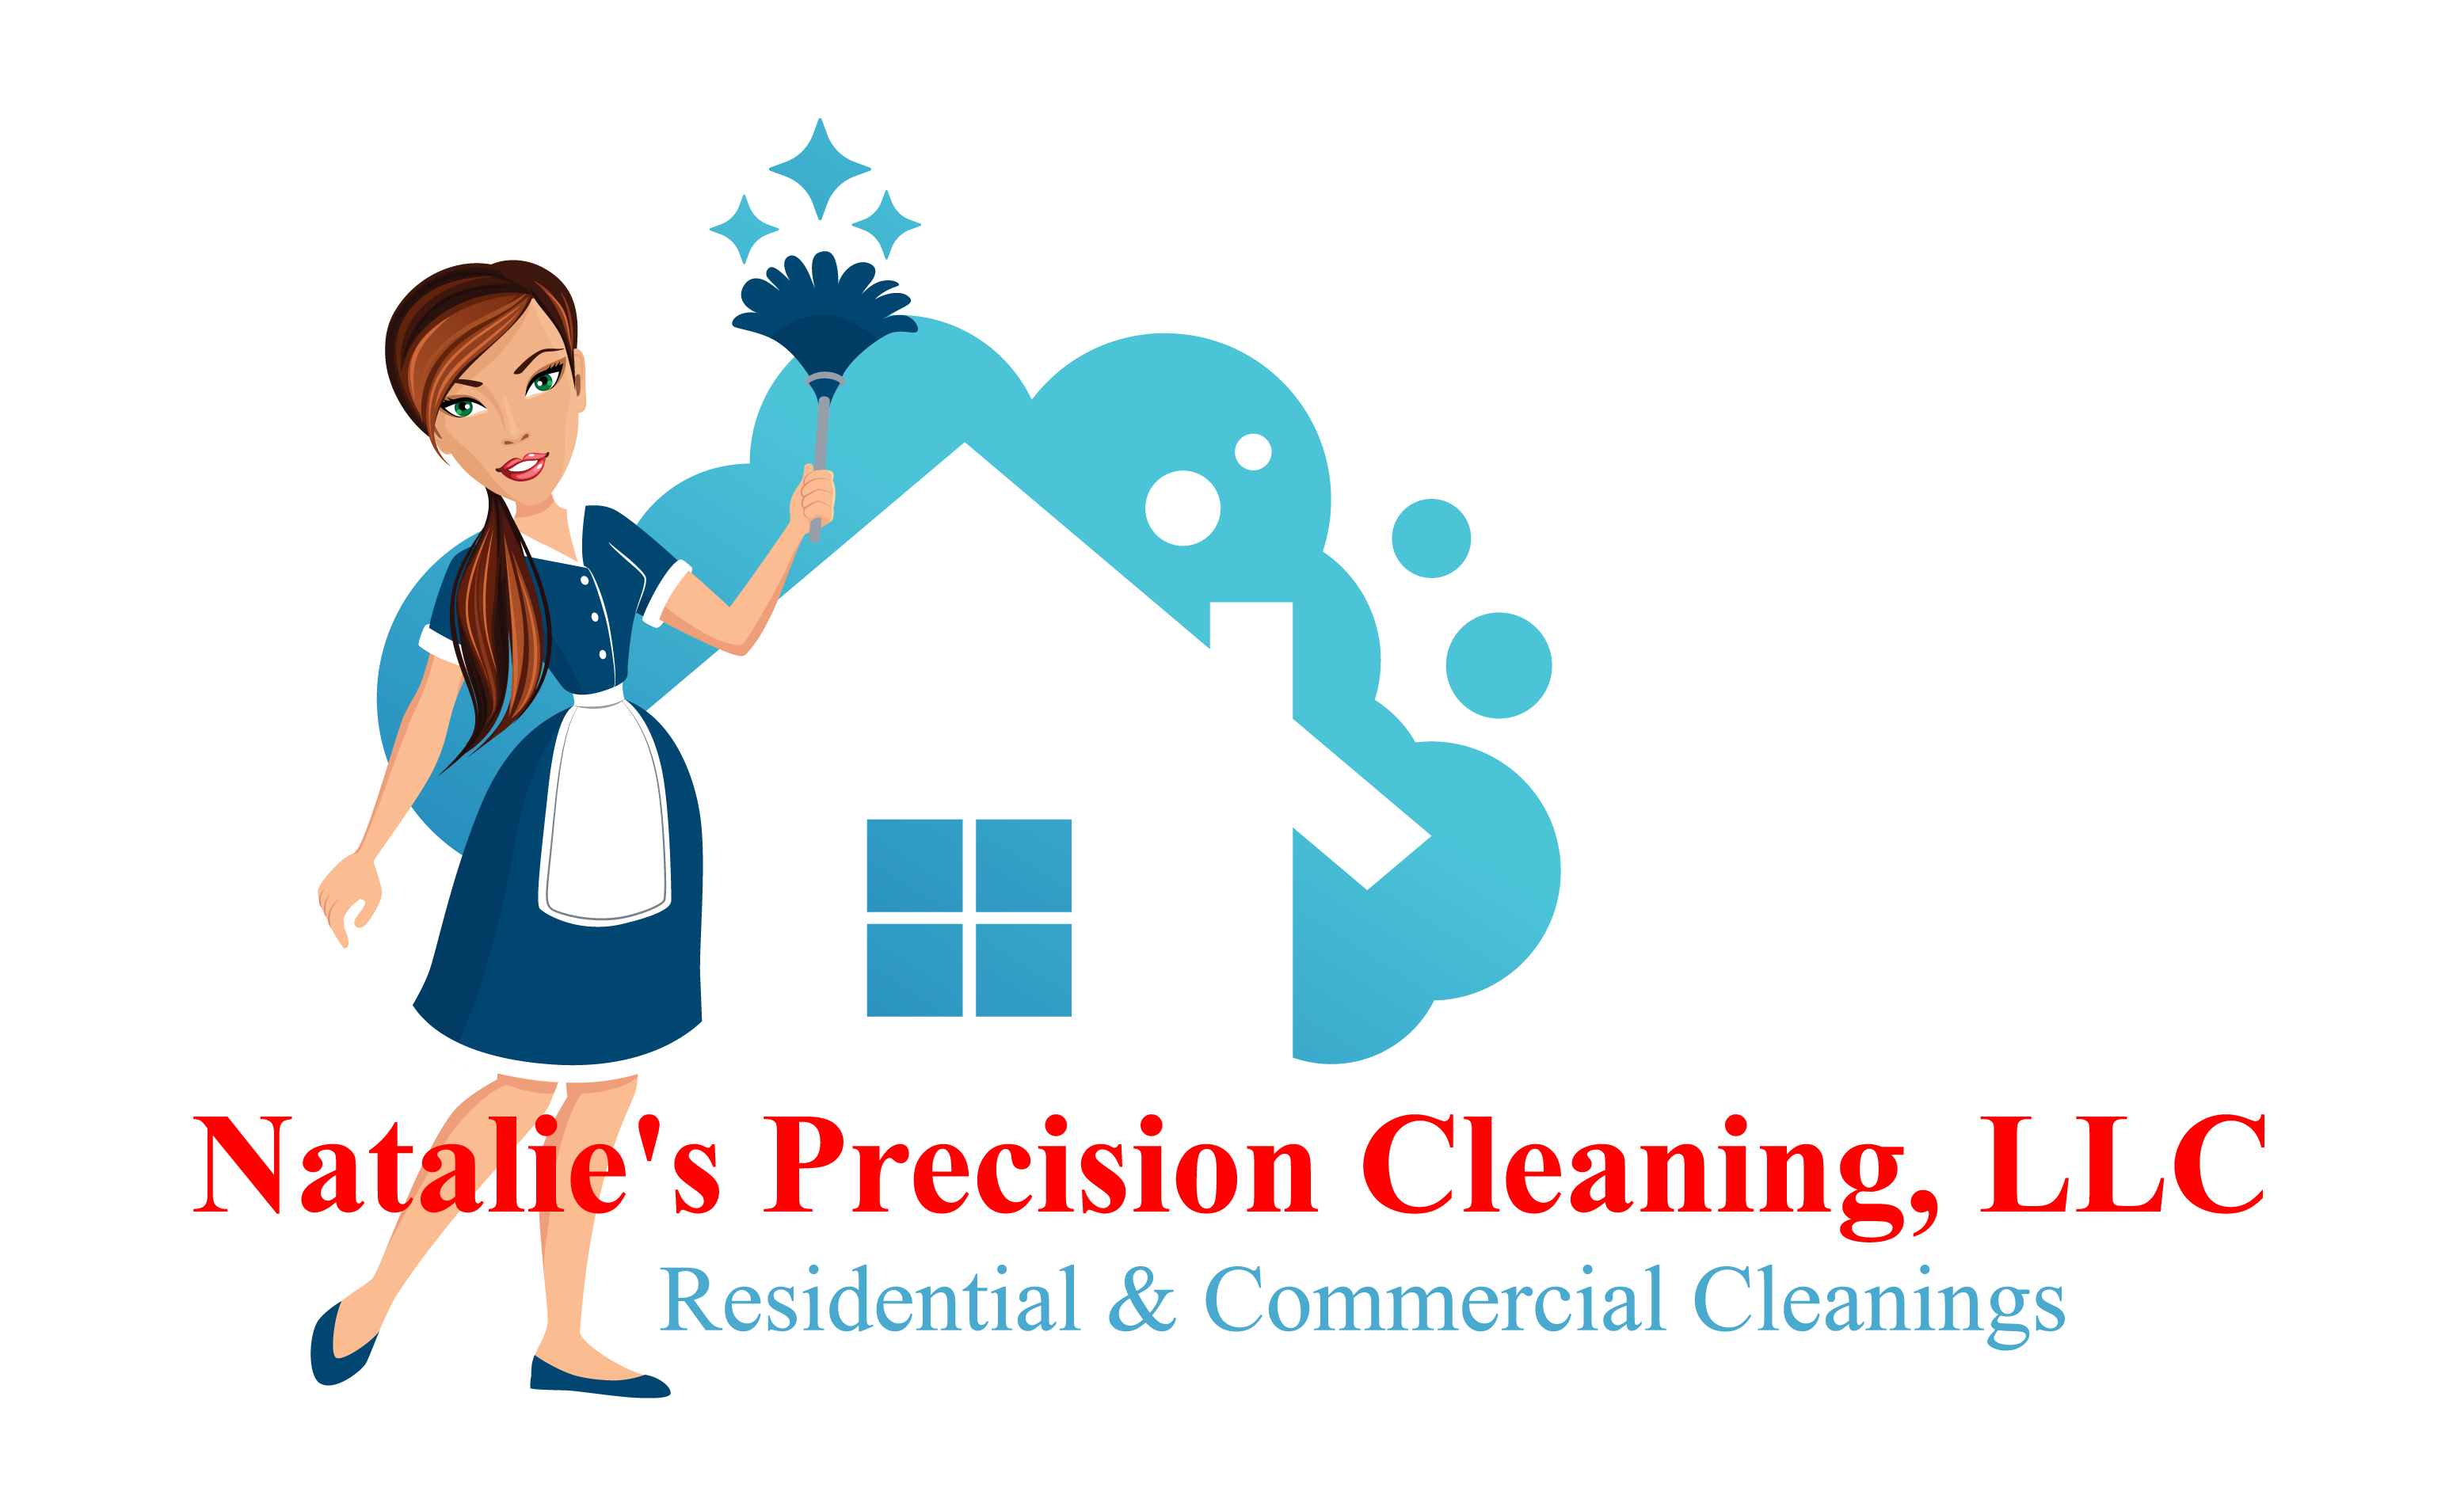 Natalie's Precision Cleaning Logo